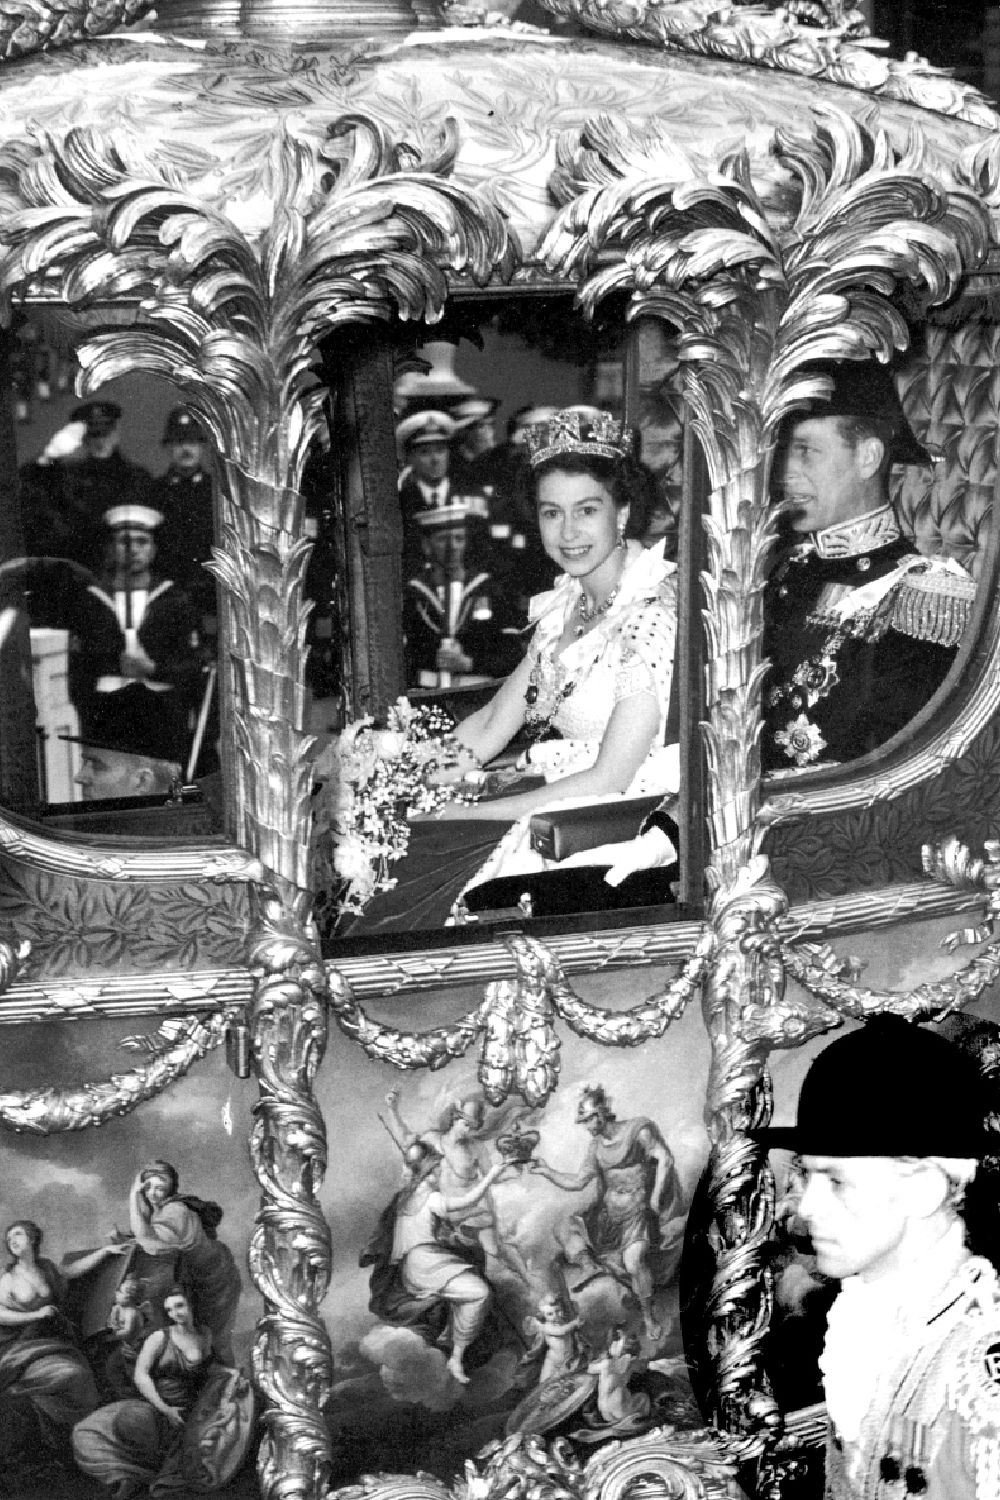 <p>                     Queen Elizabeth ascended to the throne on the 6th of February 1952 when her father King George VI passed away, but the actual Coronation Day didn't take place until 1953 - 16 months later. The country was still under a lot of economic pressure following the war and this coupled with the mourning period for the King means that the ceremony was significantly delayed.                    </p>